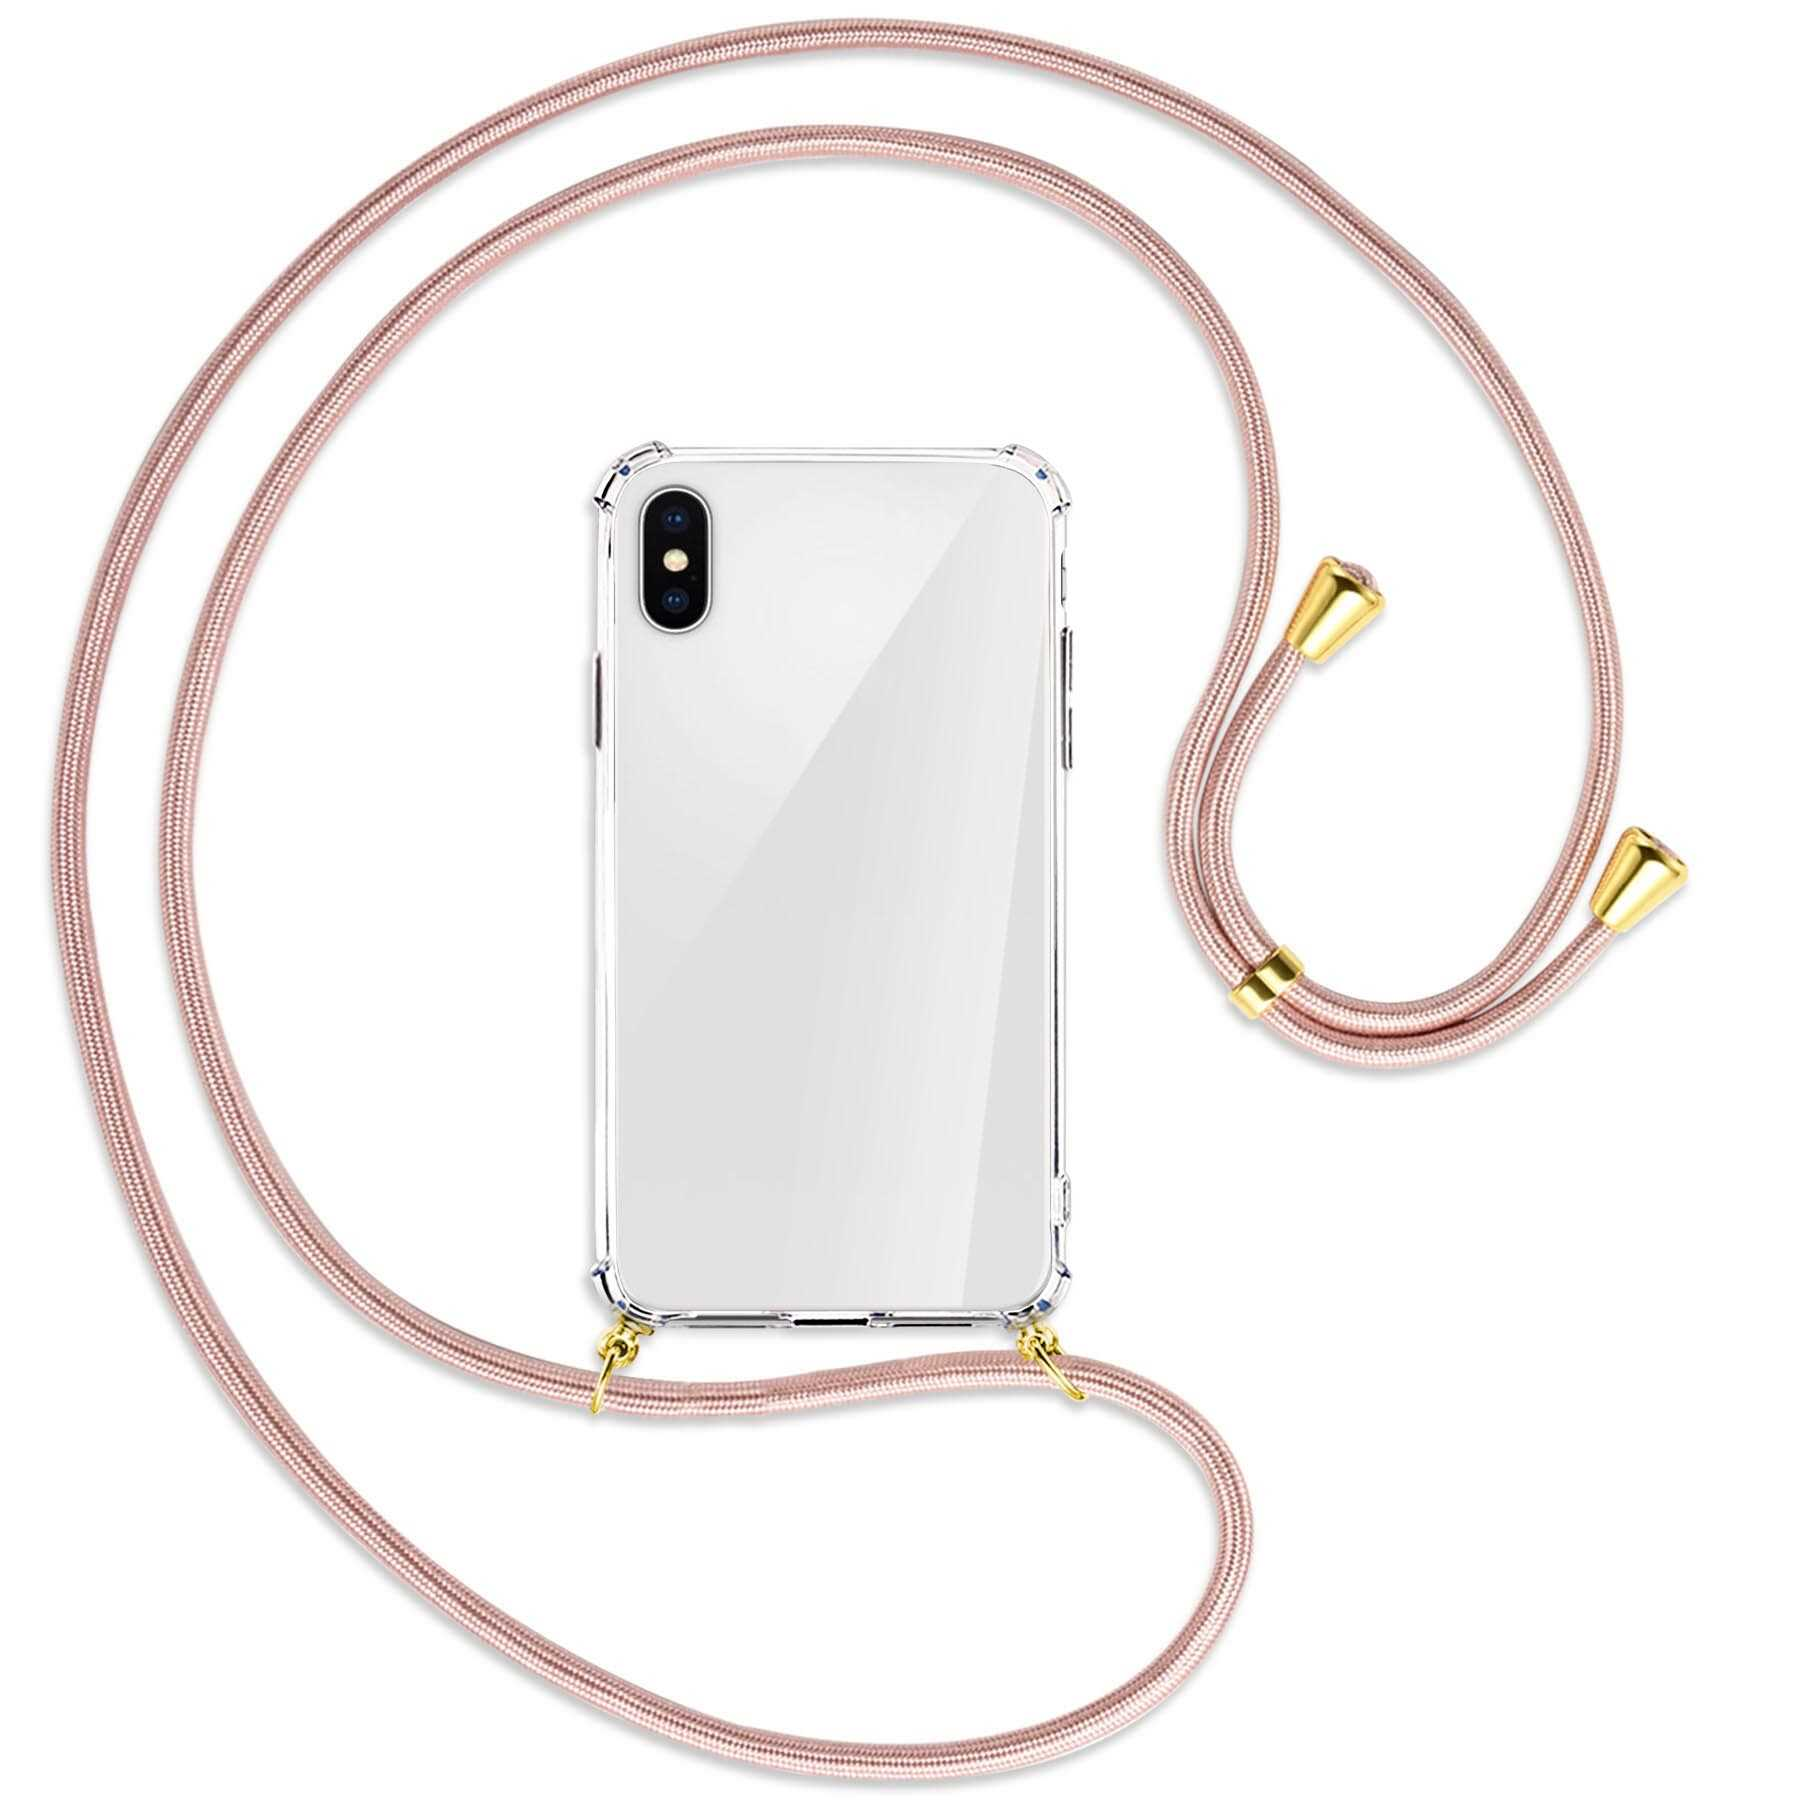 Apple, / Rosegold 10, Kordel, iPhone iPhone Umhänge-Hülle XS, MORE ENERGY mit X, iPhone Backcover, Gold MTB